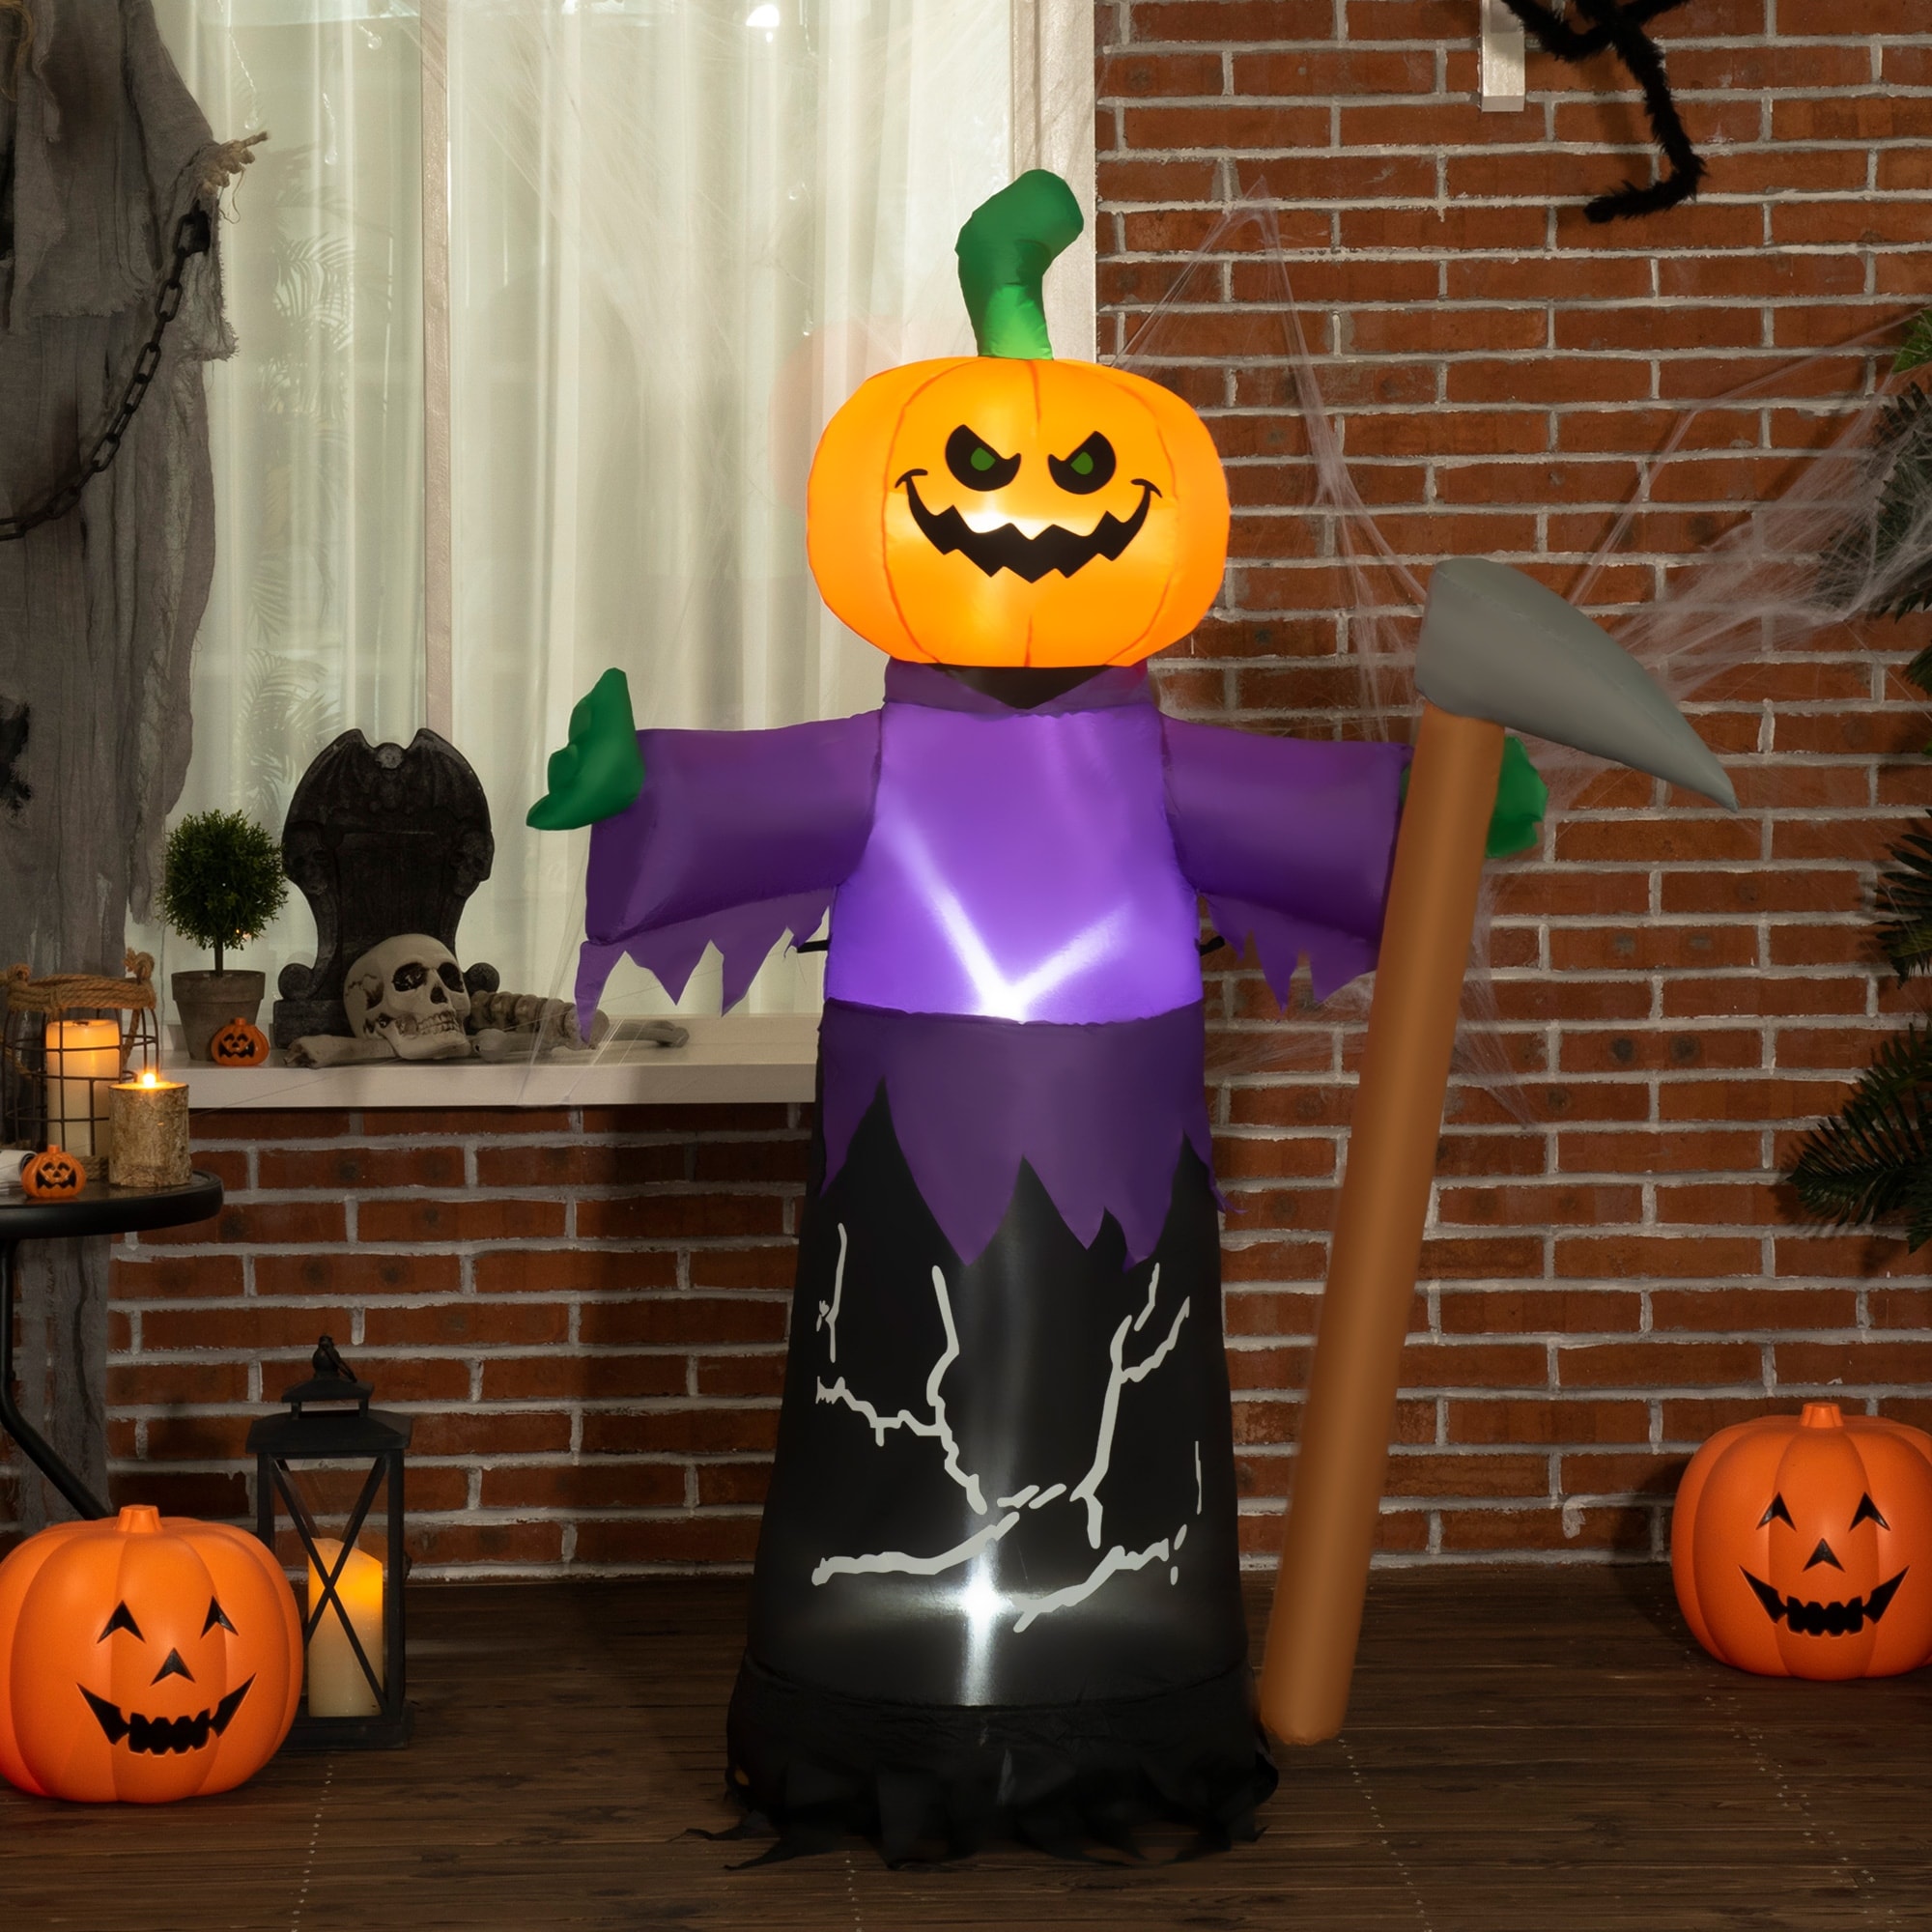 https://ak1.ostkcdn.com/images/products/is/images/direct/5977eee5c0bf67a1956ef4327167a82b93ec436c/Outsunny-5ft-Inflatable-Halloween-Pumpkin-Man-Reaper%2C-Blow-Up-Outdoor-LED-Yard-Display-for-Garden%2C-Lawn%2C-Party%2C-Holiday.jpg